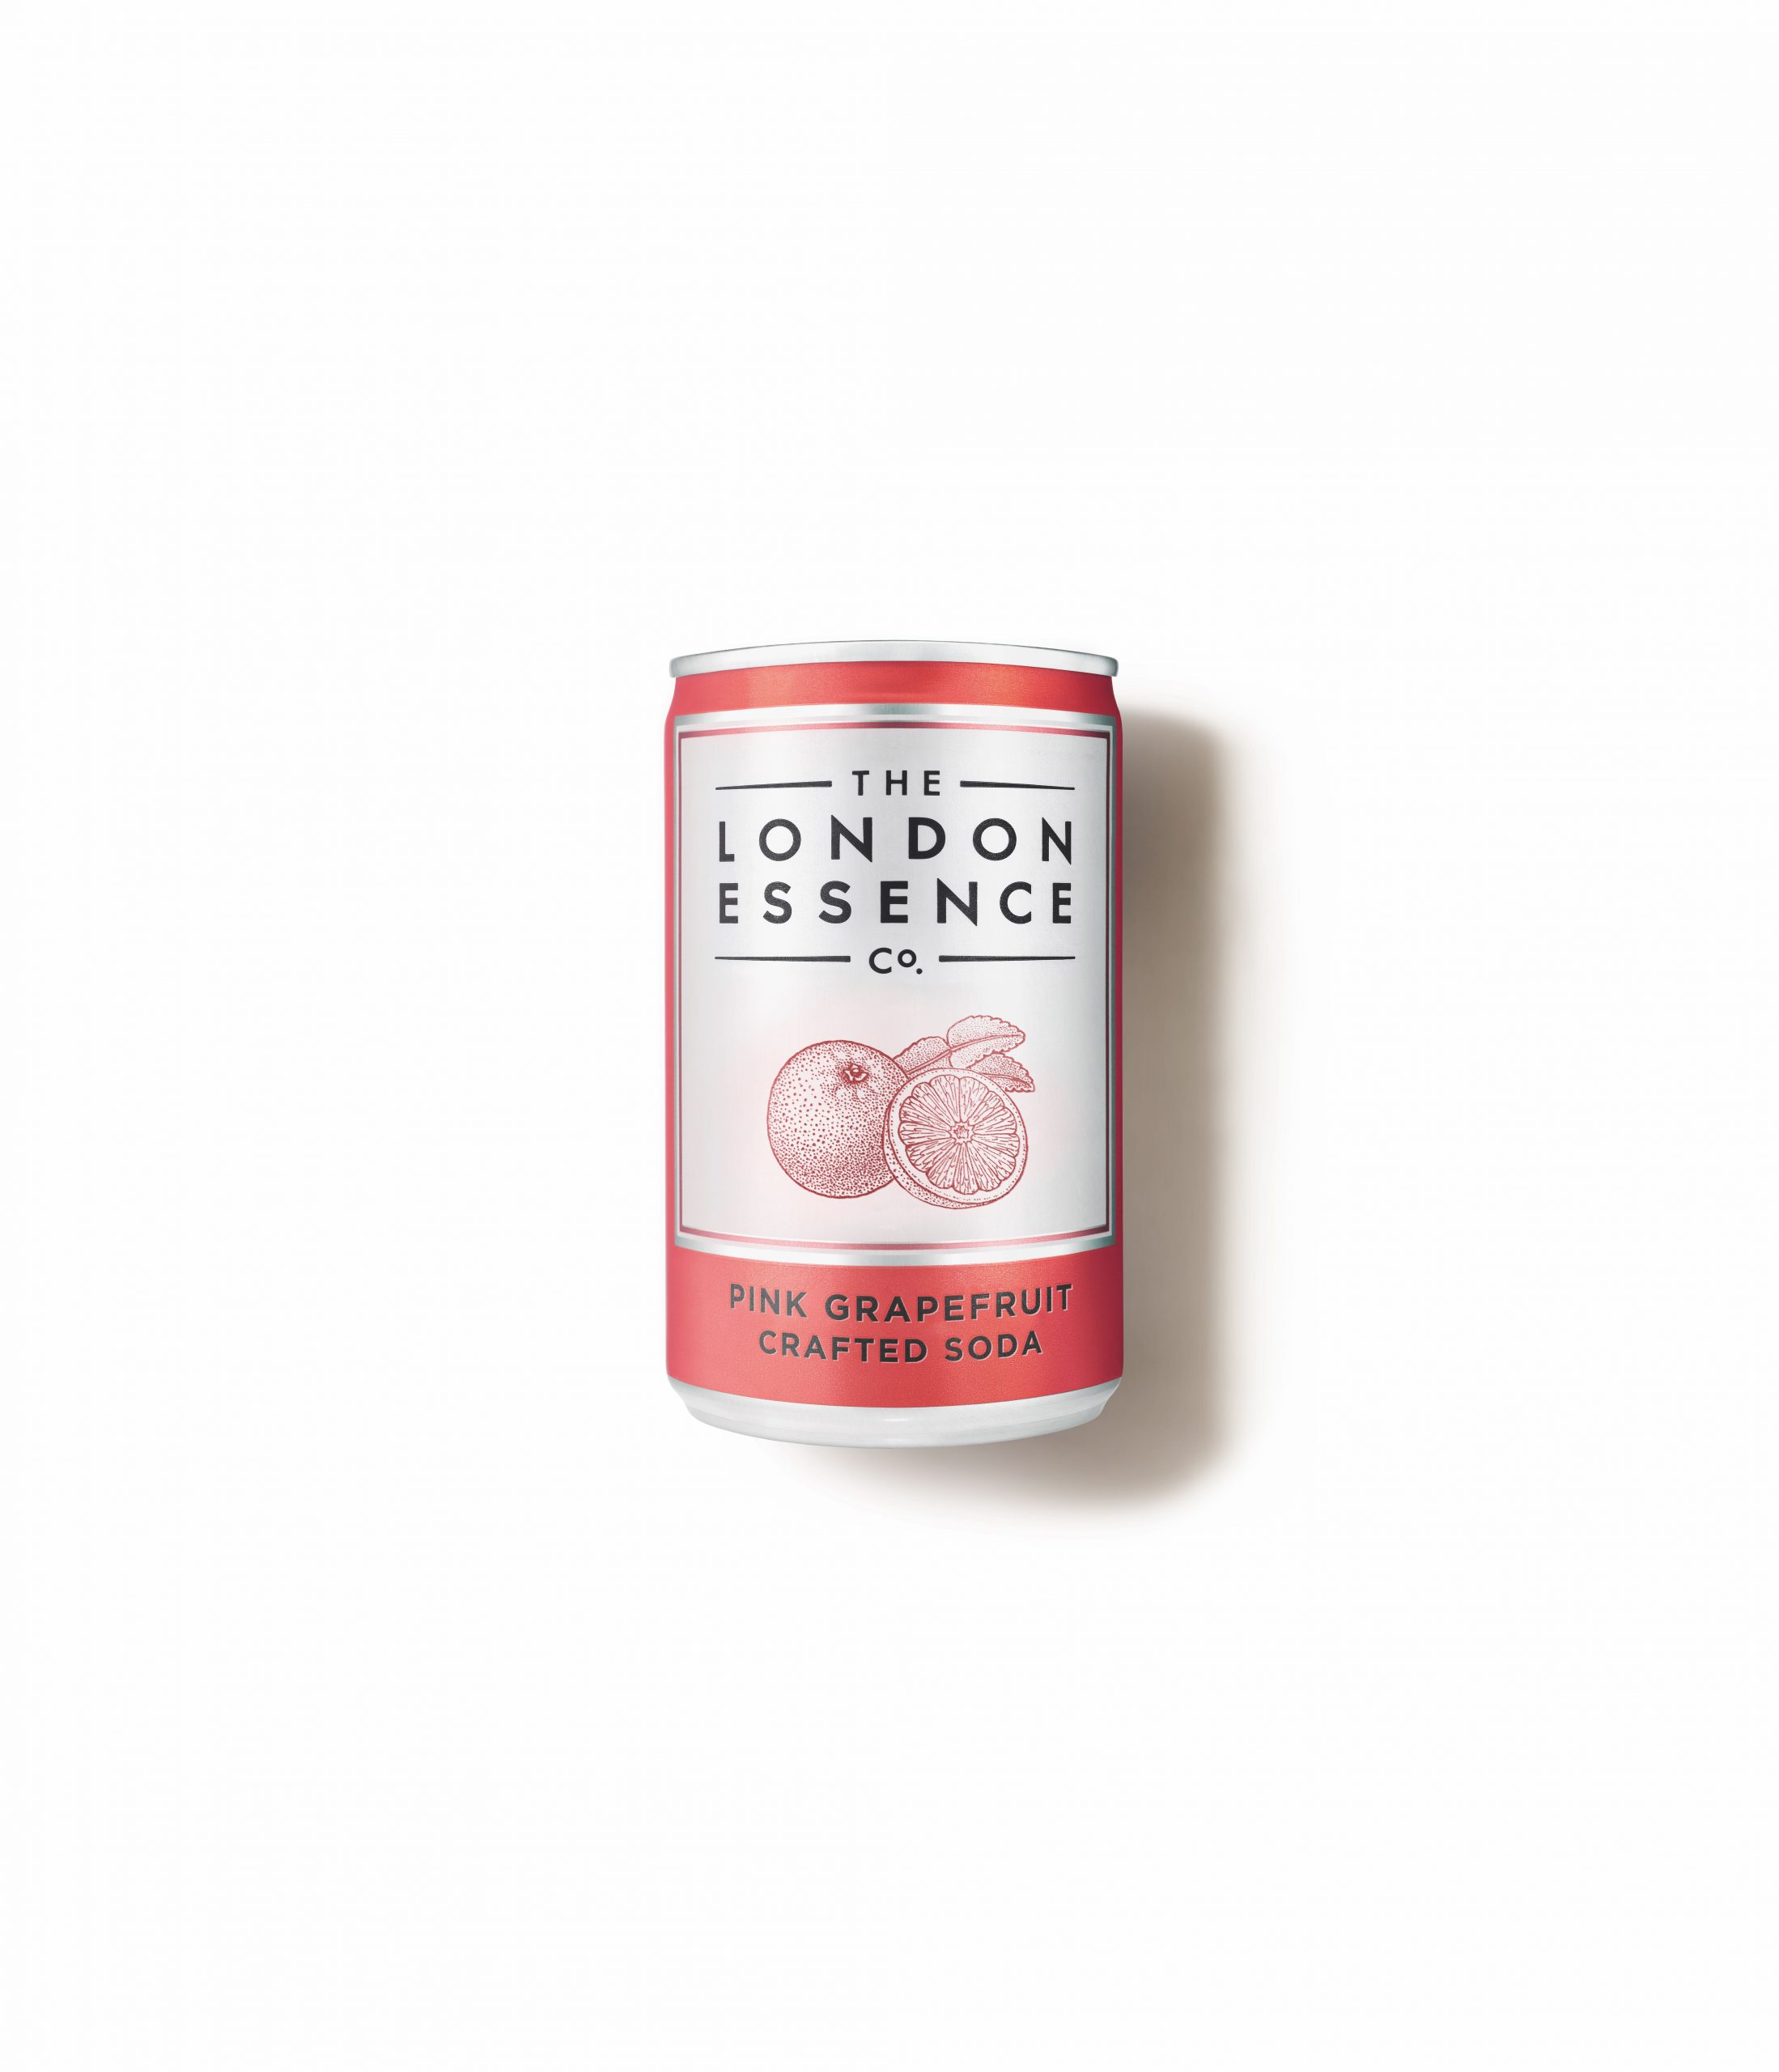 The London Essence Co. expands crafted sodas into new formats